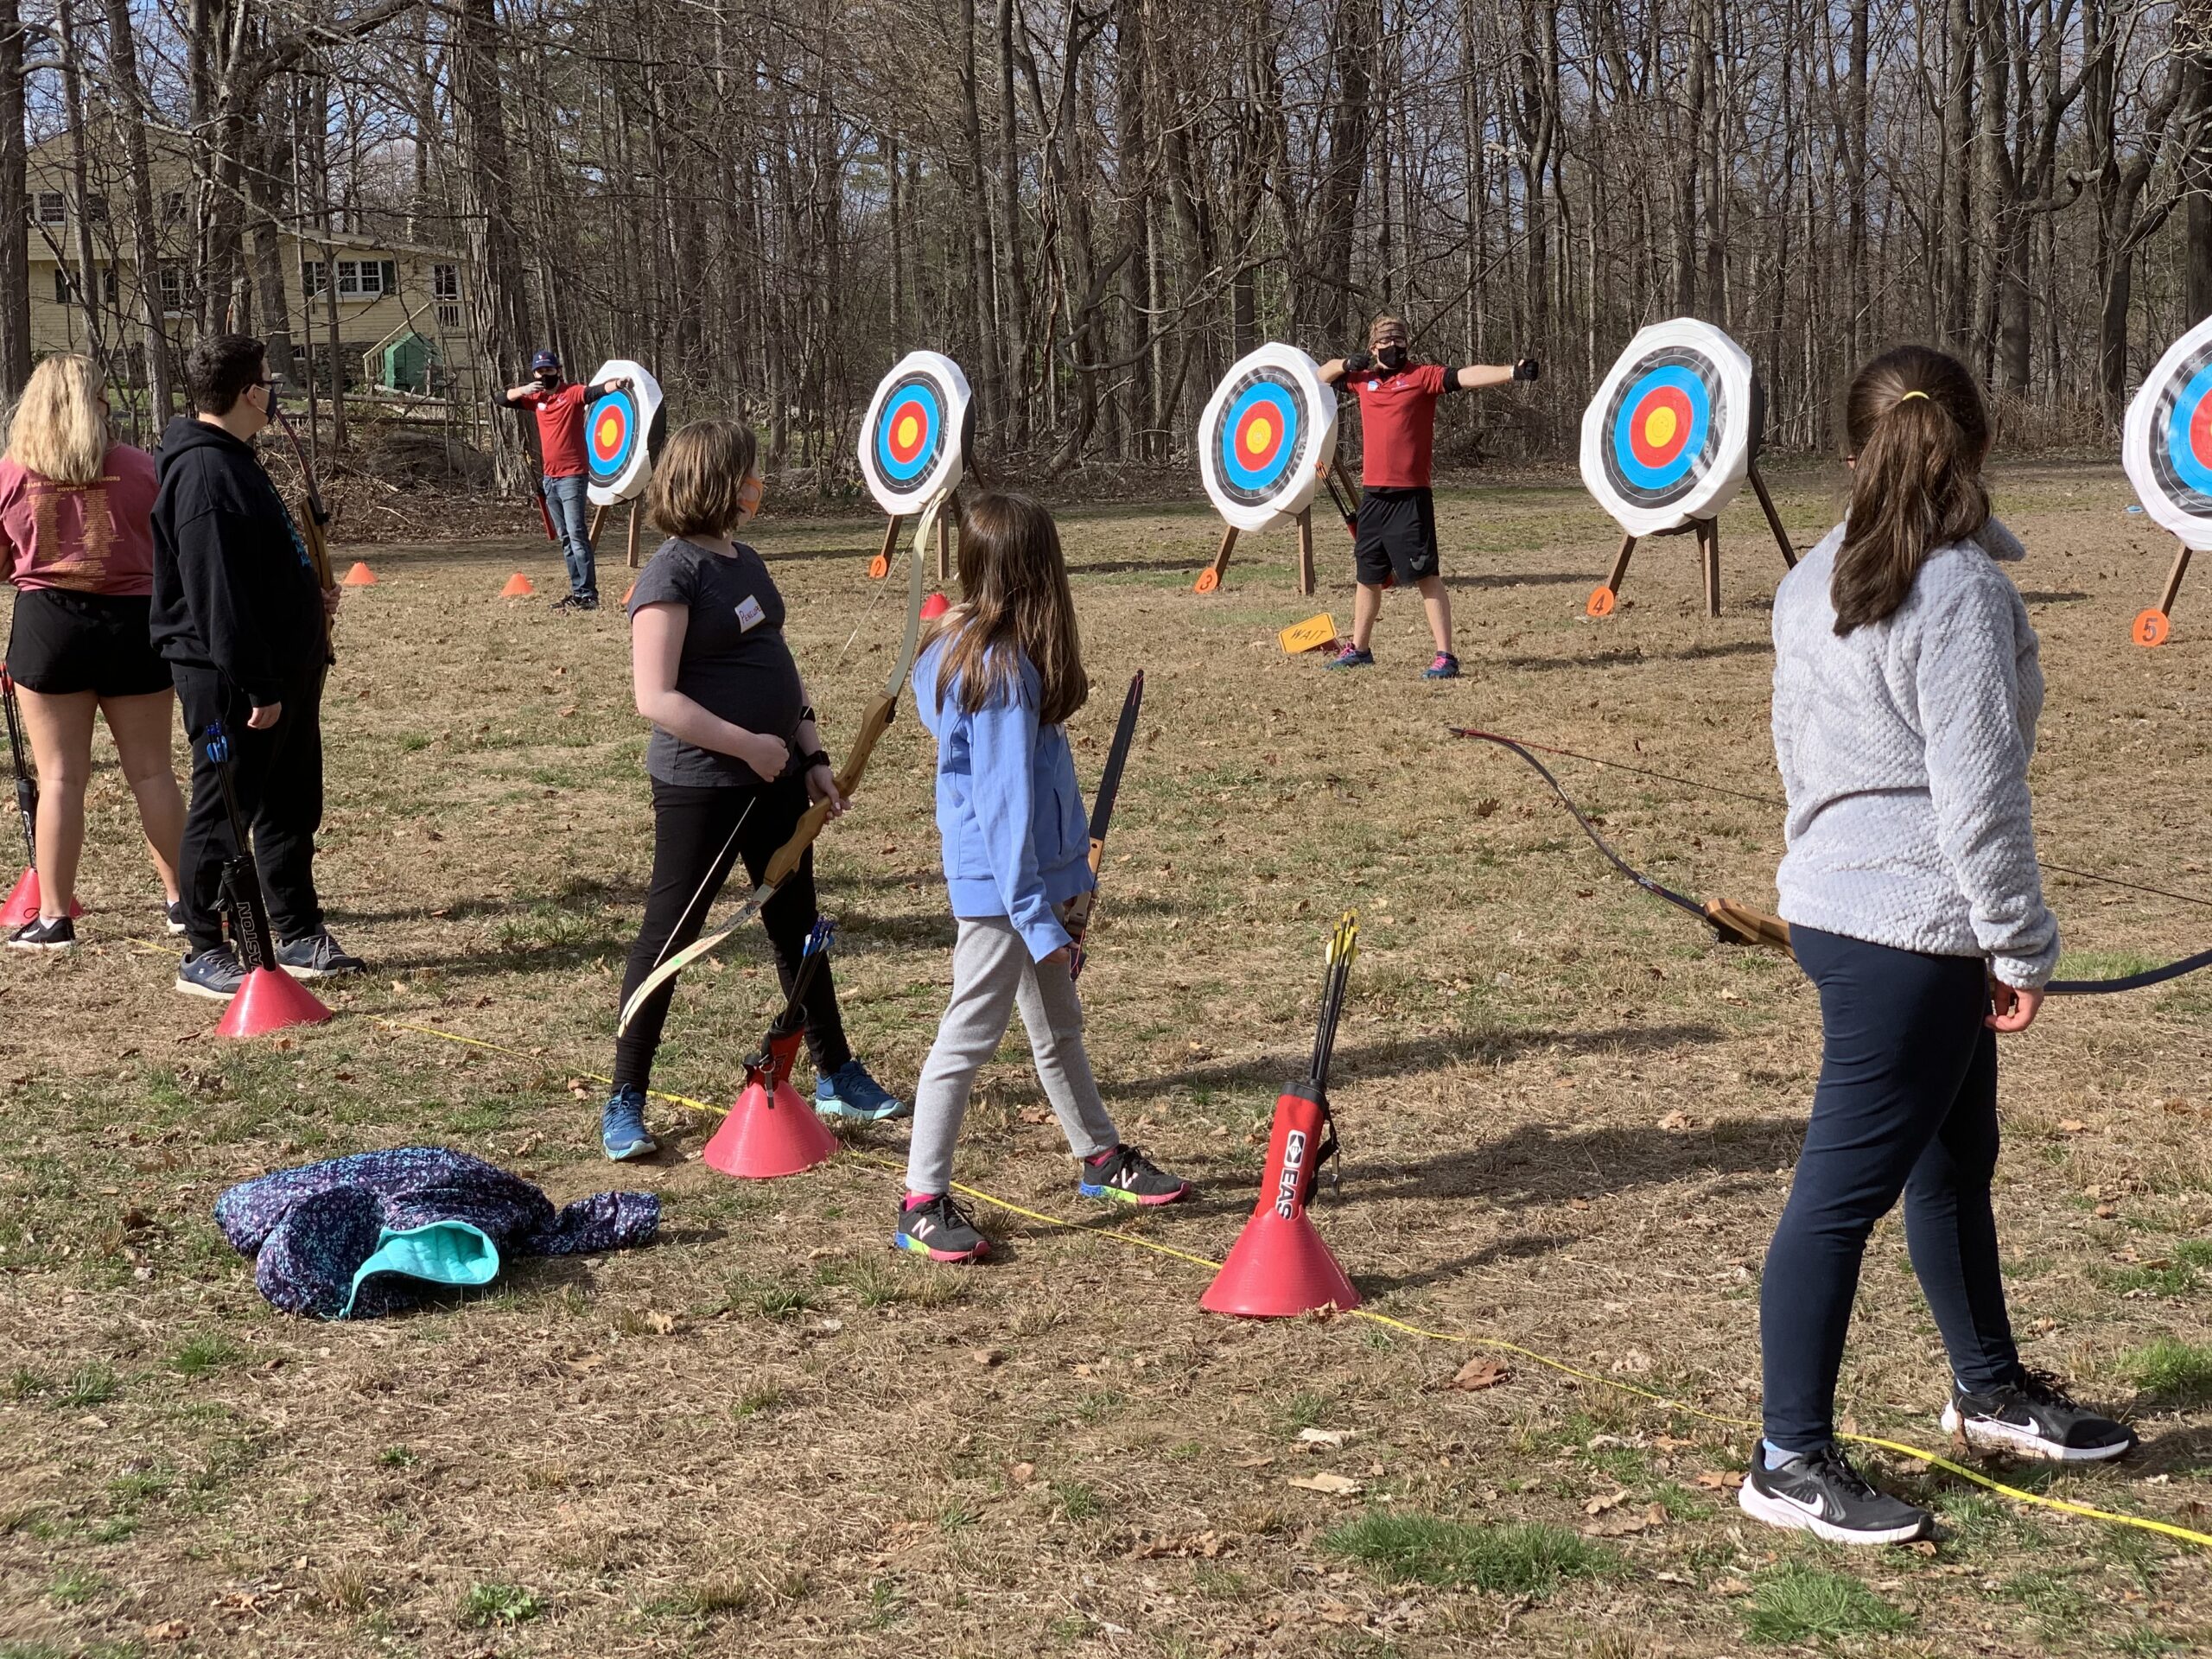 Archery, etiquette, etc.: Parks & Rec offers wider variety of activities